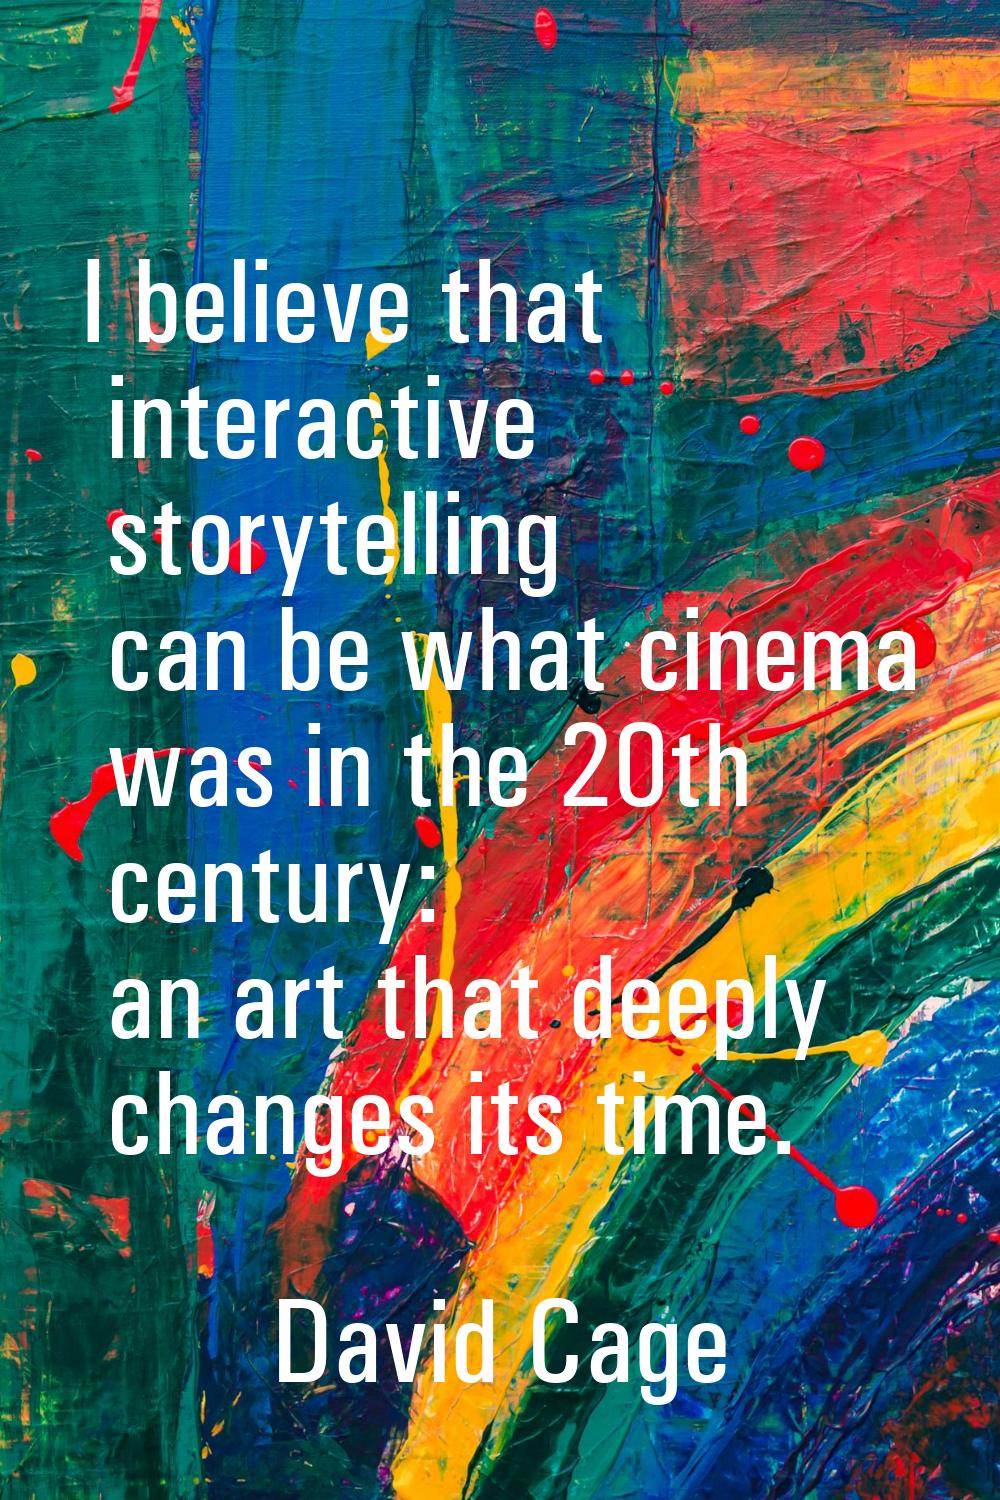 I believe that interactive storytelling can be what cinema was in the 20th century: an art that dee